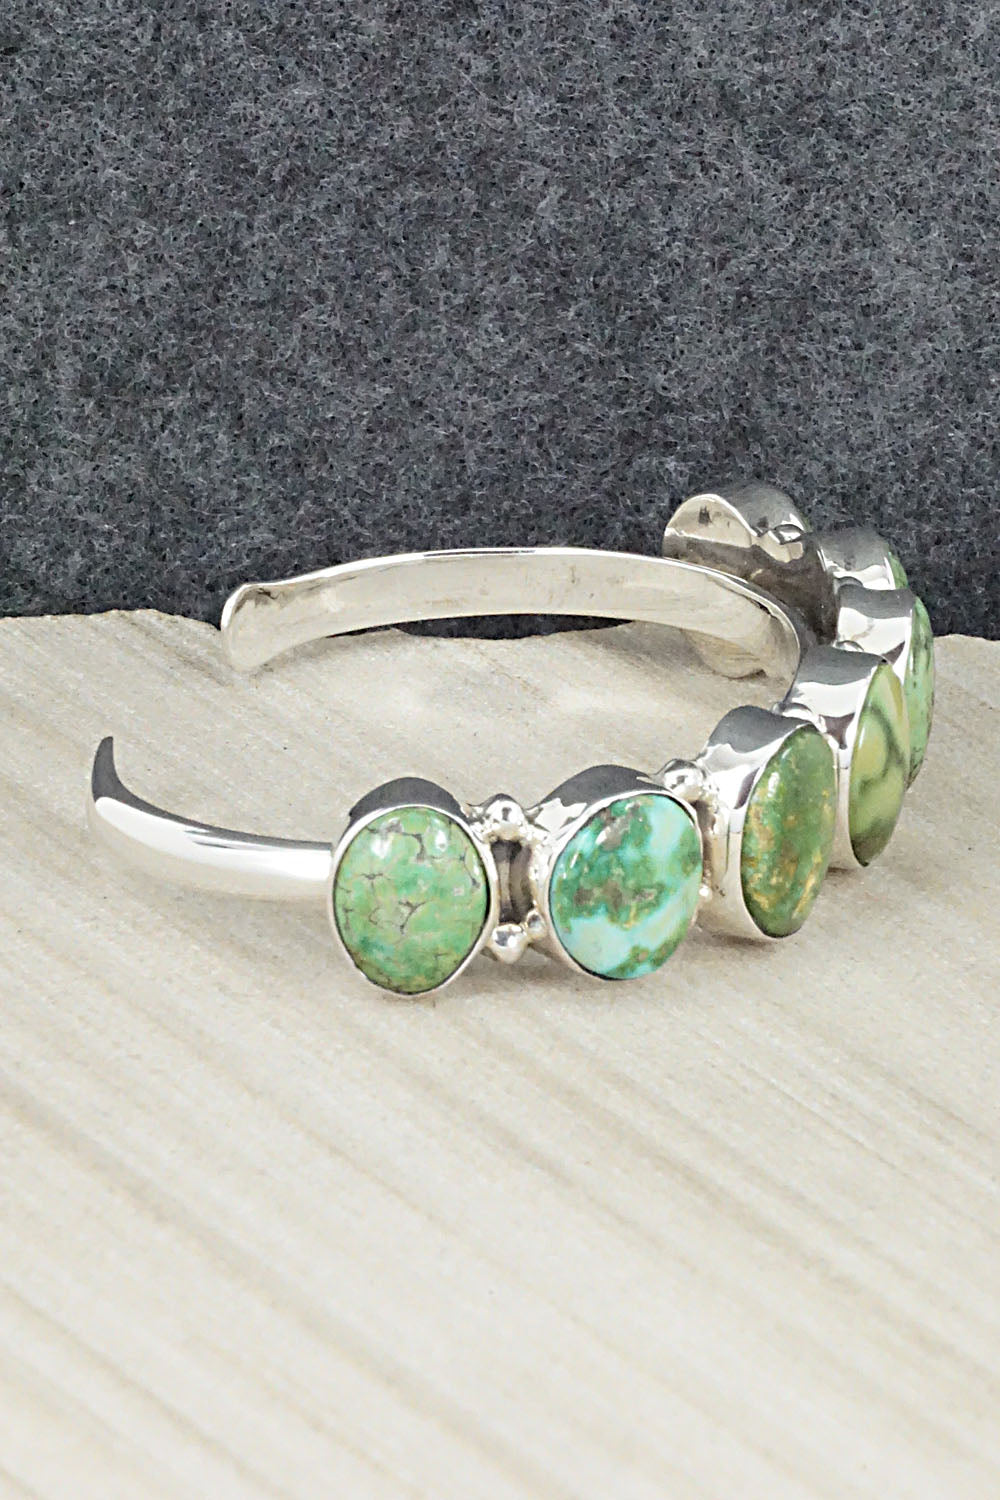 Turquoise & Sterling Silver Bracelet - Thomas Yazzie